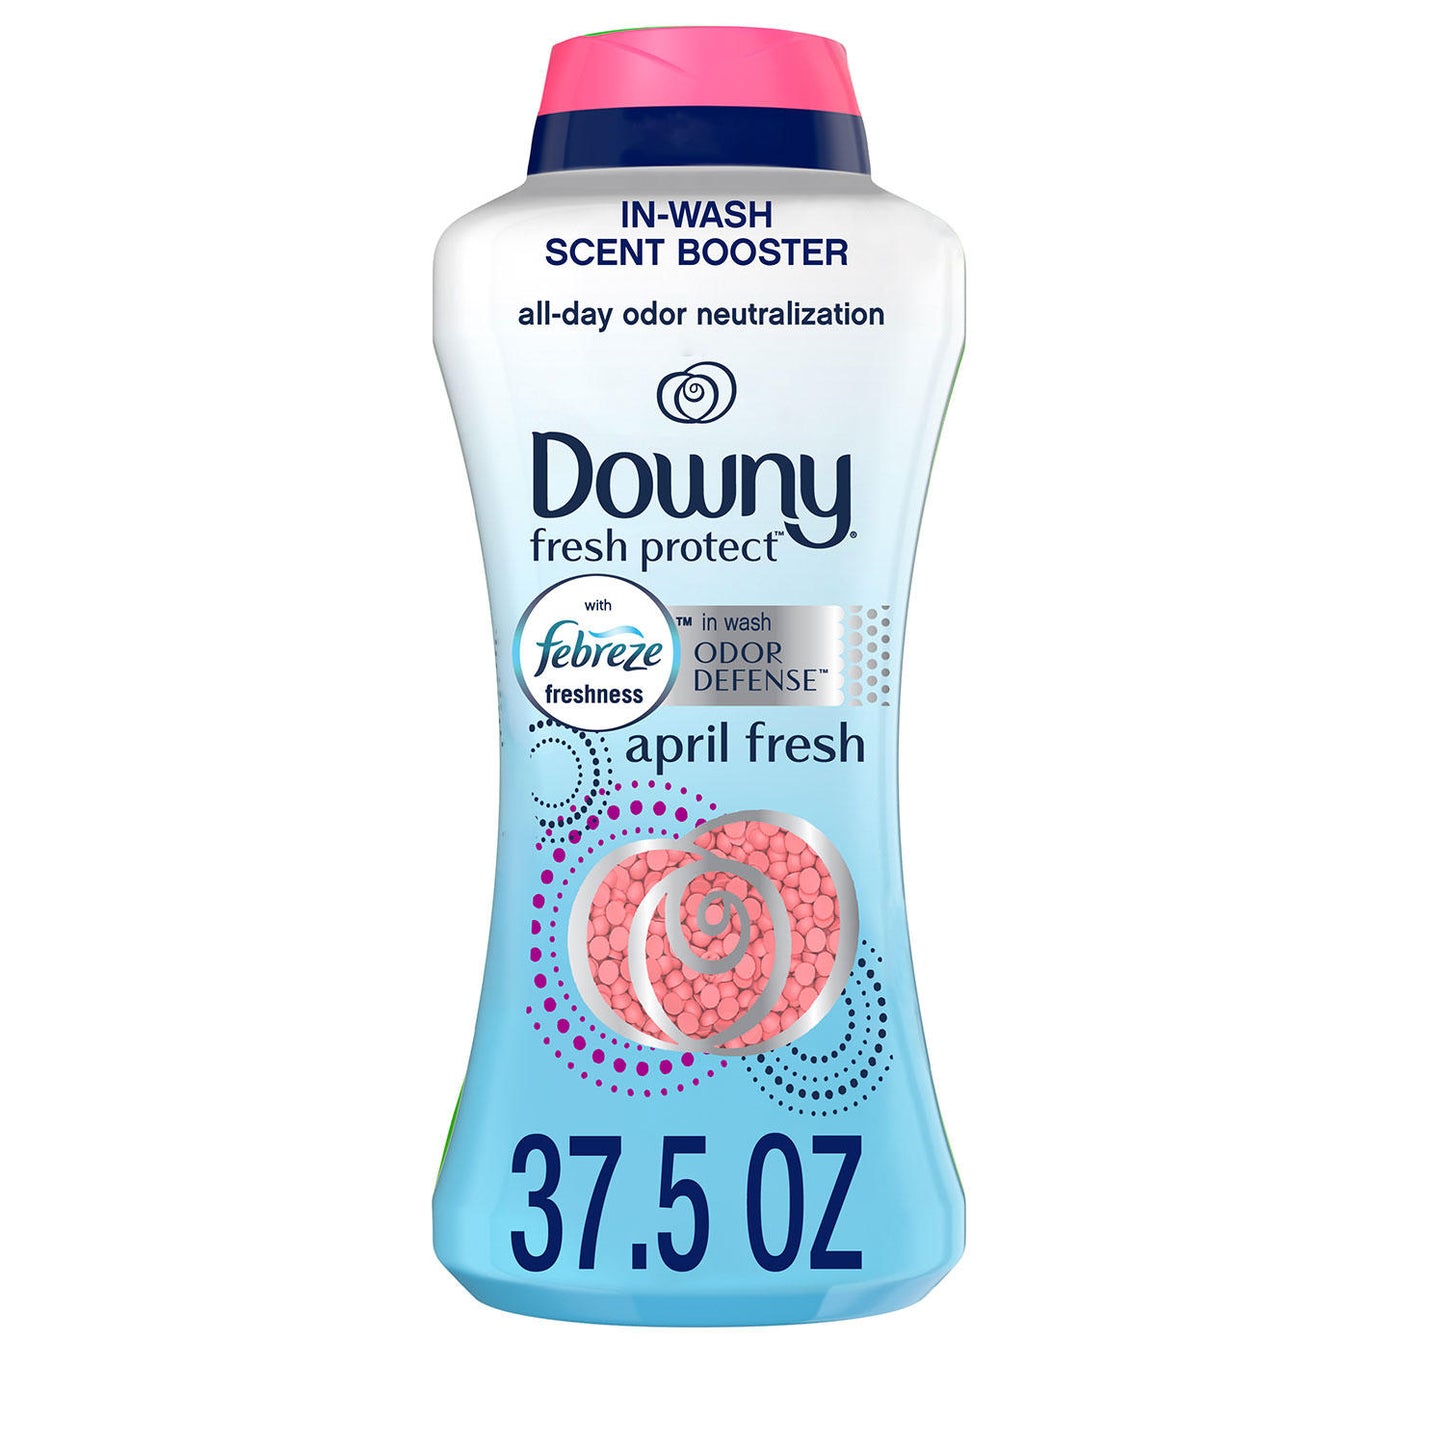 Downy Fresh Protect HE In-Wash Odor Defense Scent Beads, April